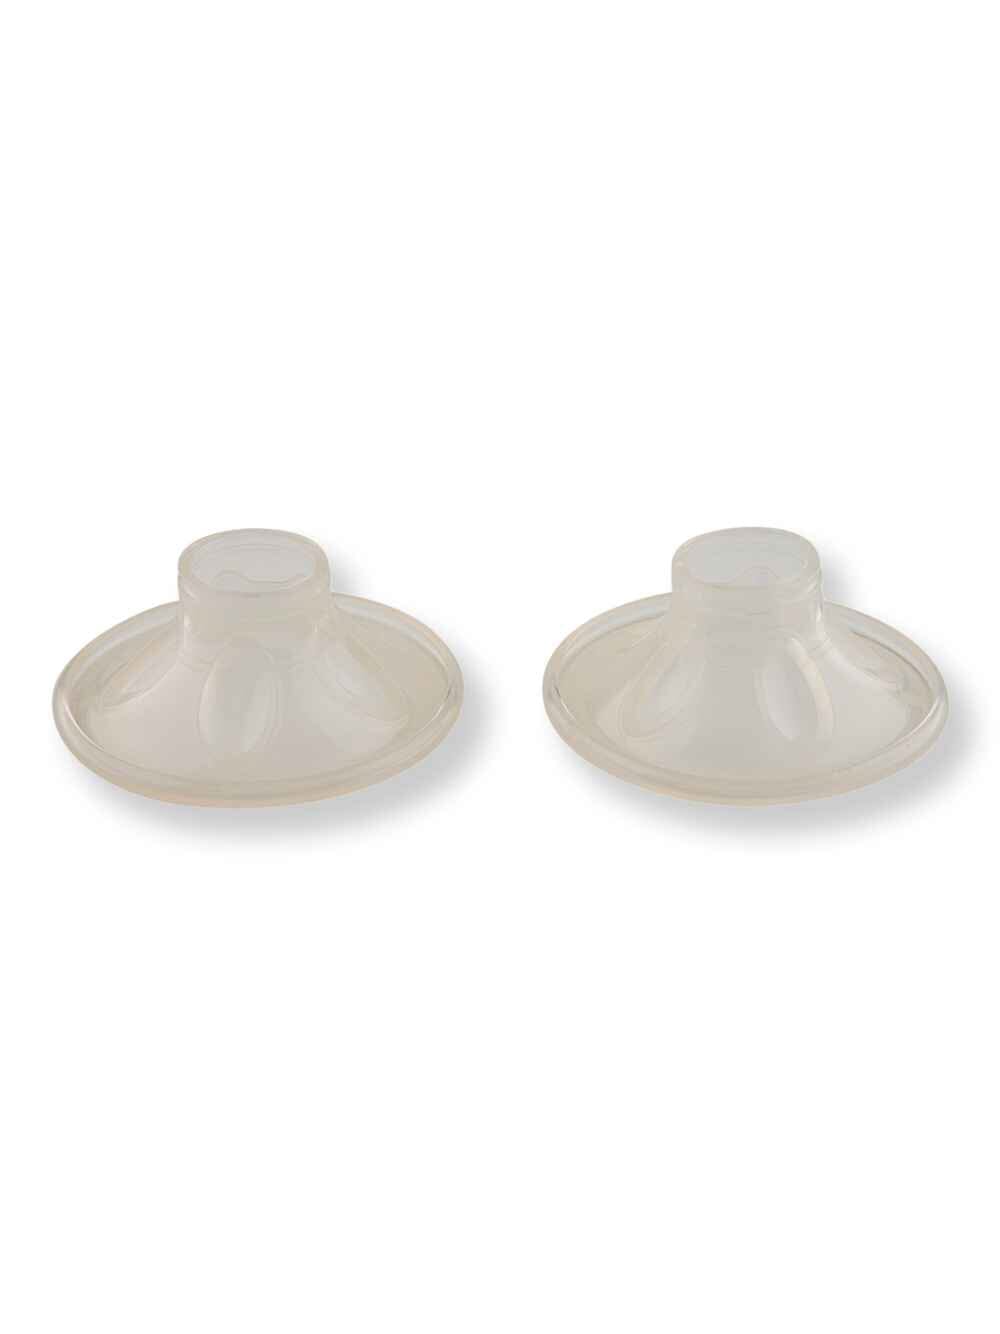 Philips Avent Philips Avent Large Comfort Breast Cushion 2 ct Breast Pump Accessories 